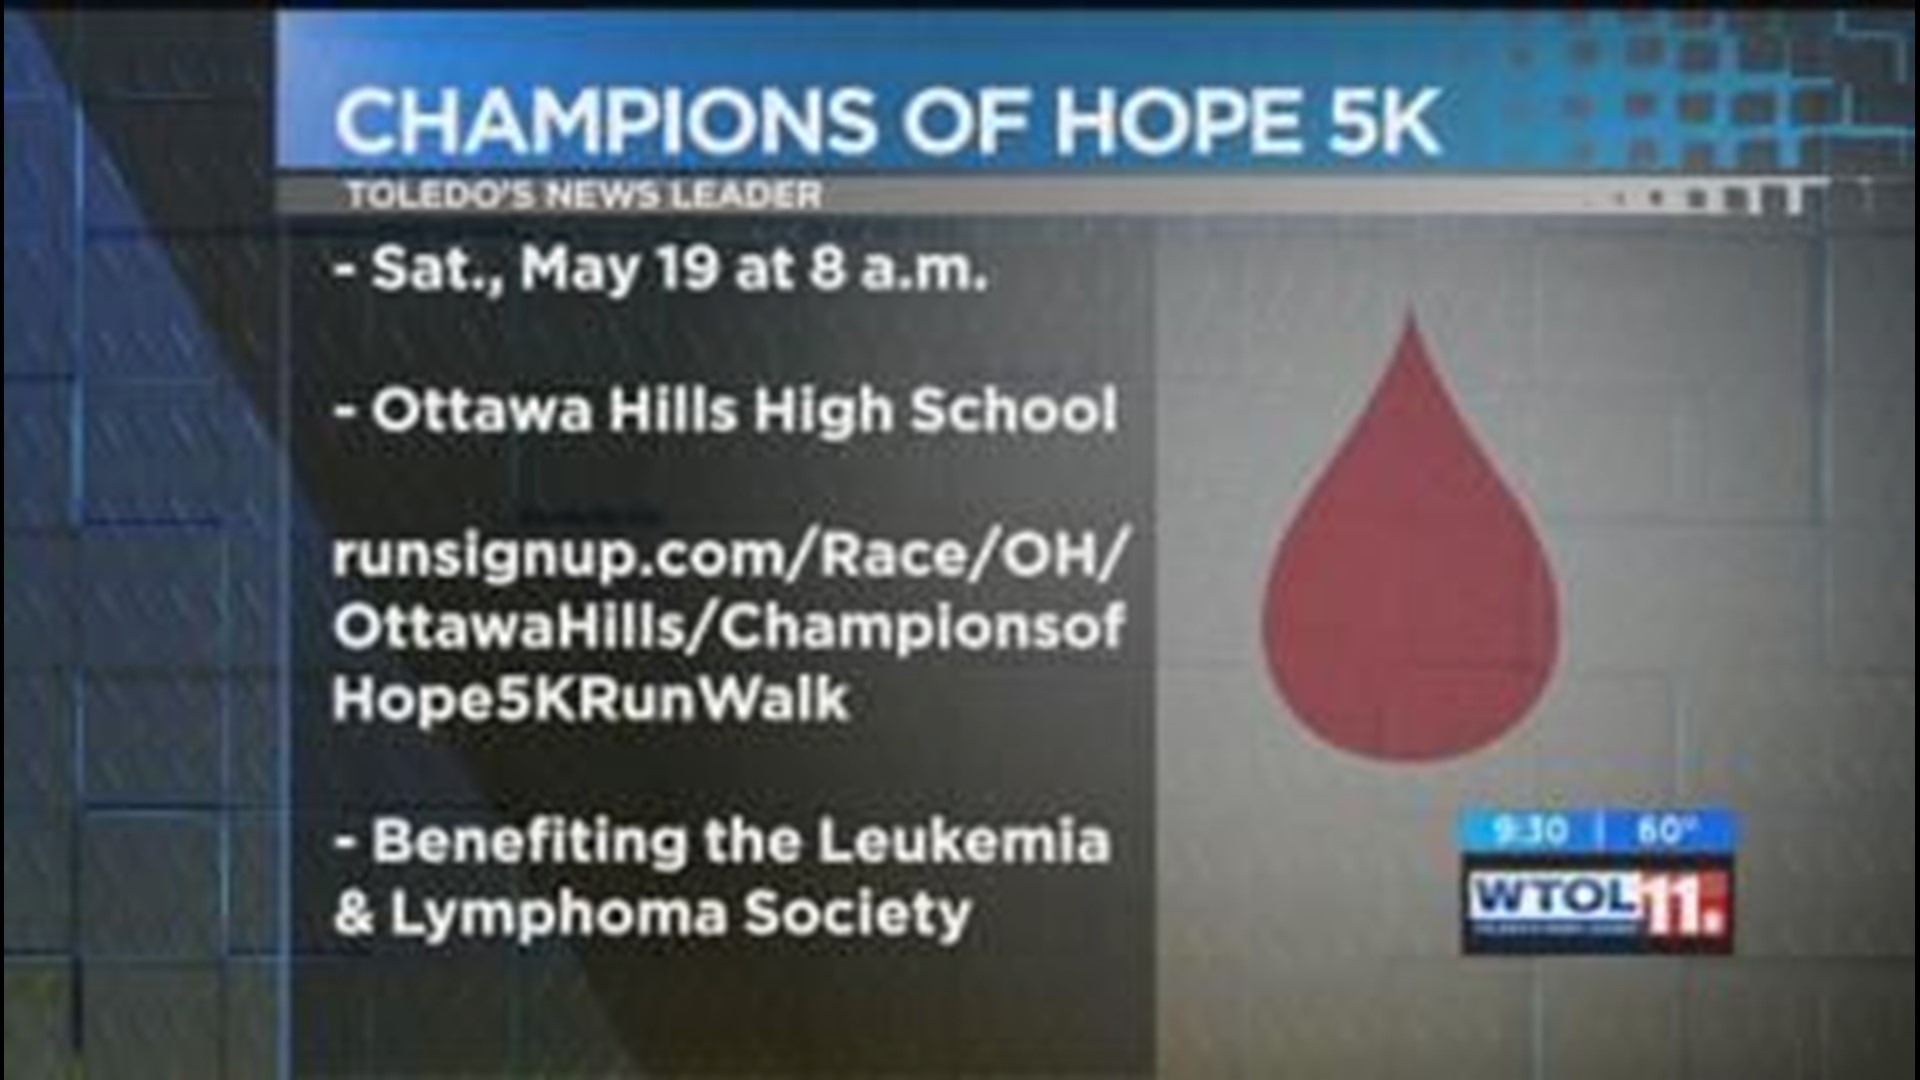 Participate in Champions of Hope 5K this weekend to benefit LLS